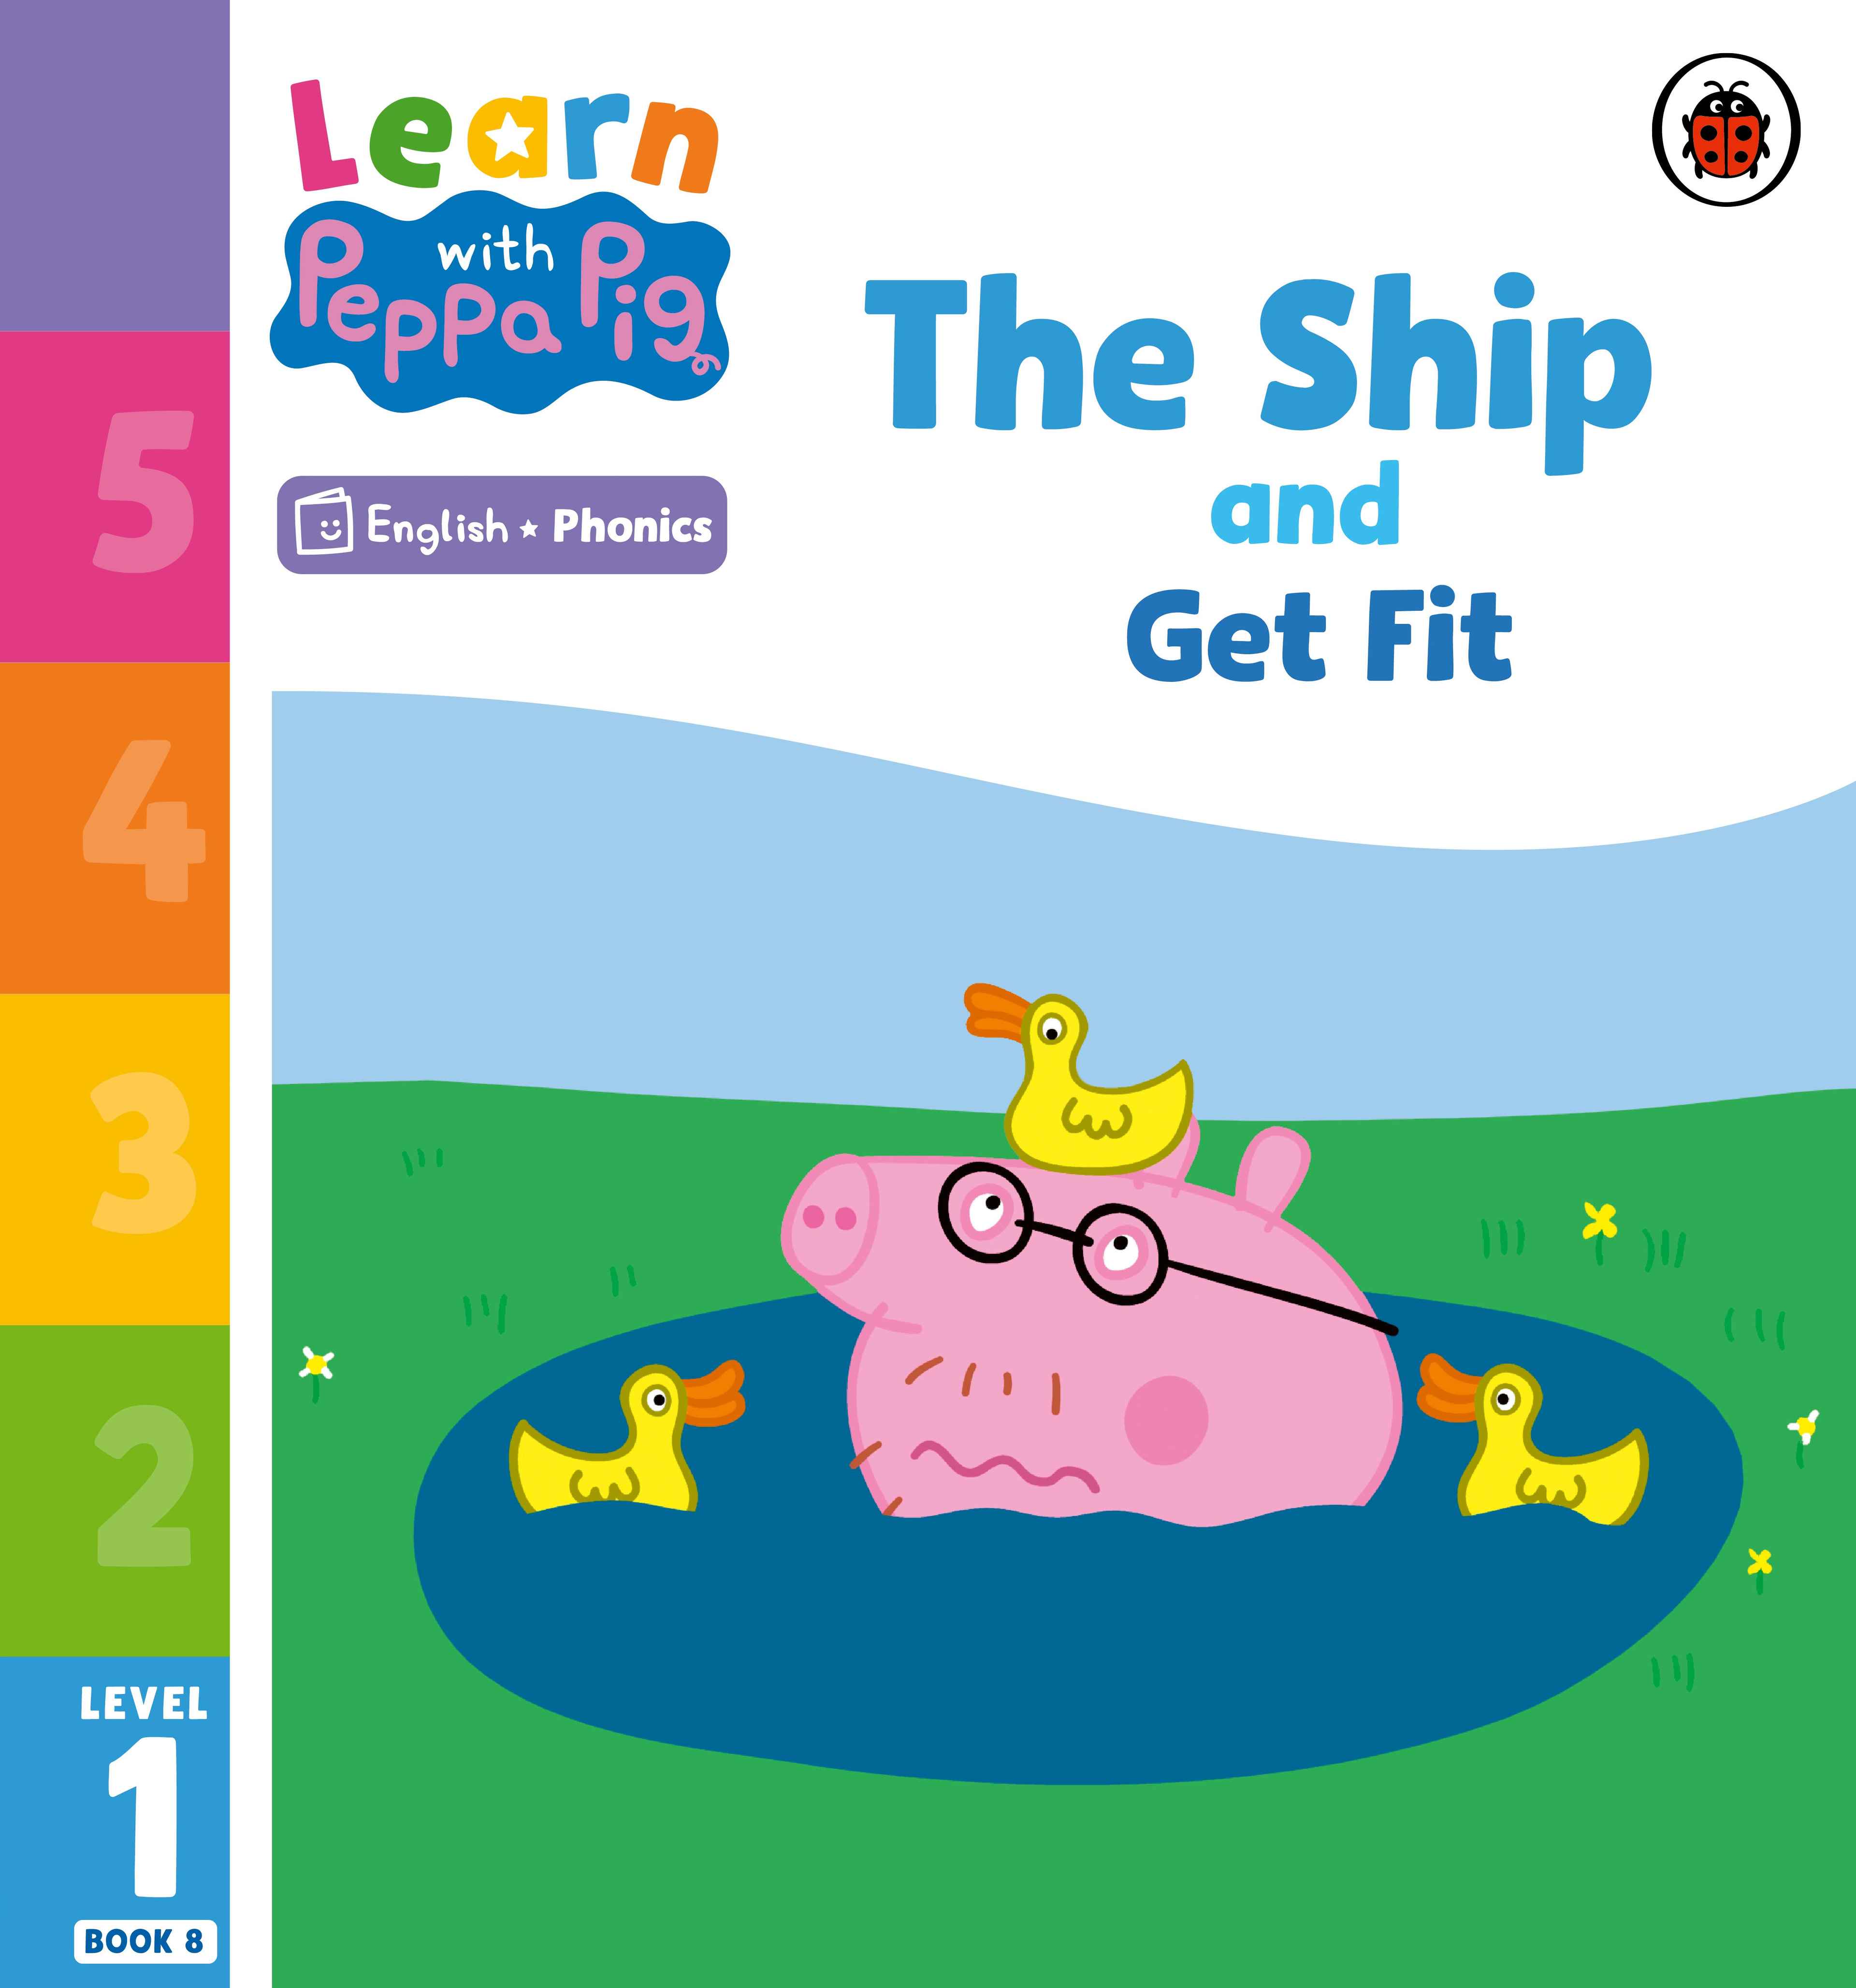 The Ship and Get Fit